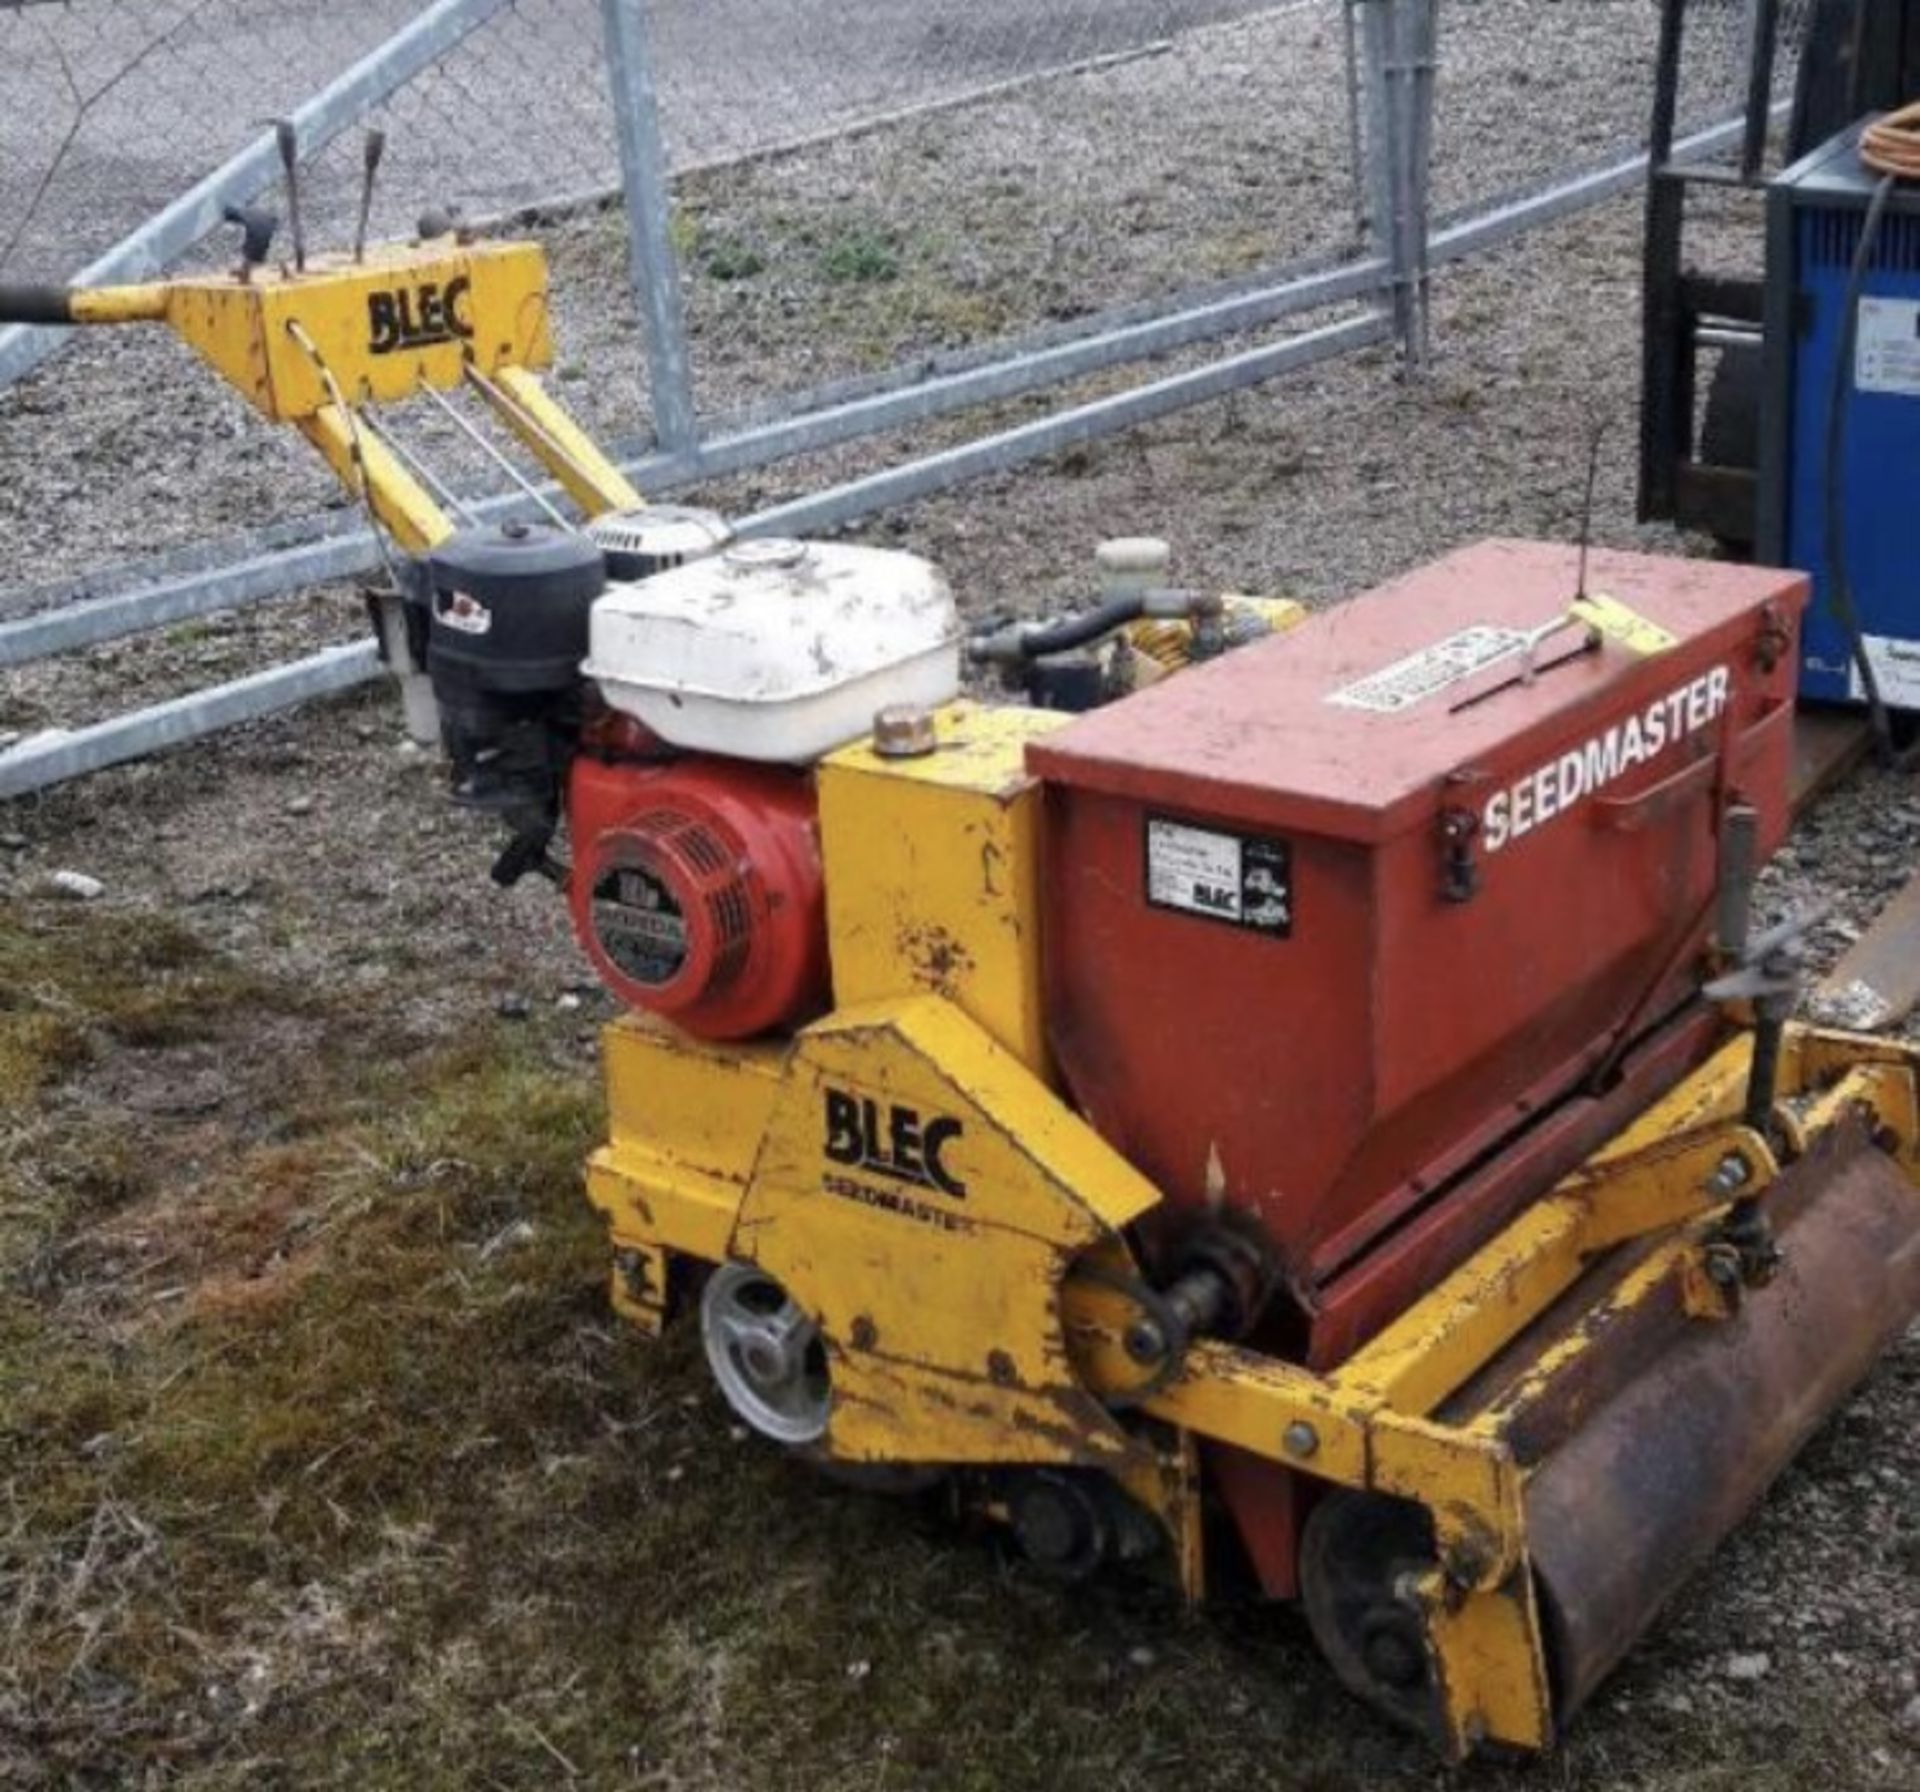 BLEC SEEDER HONDA PETROL ENGINE WITH COMACTION PLATE.LOCATION NORTHERN IRELAND.